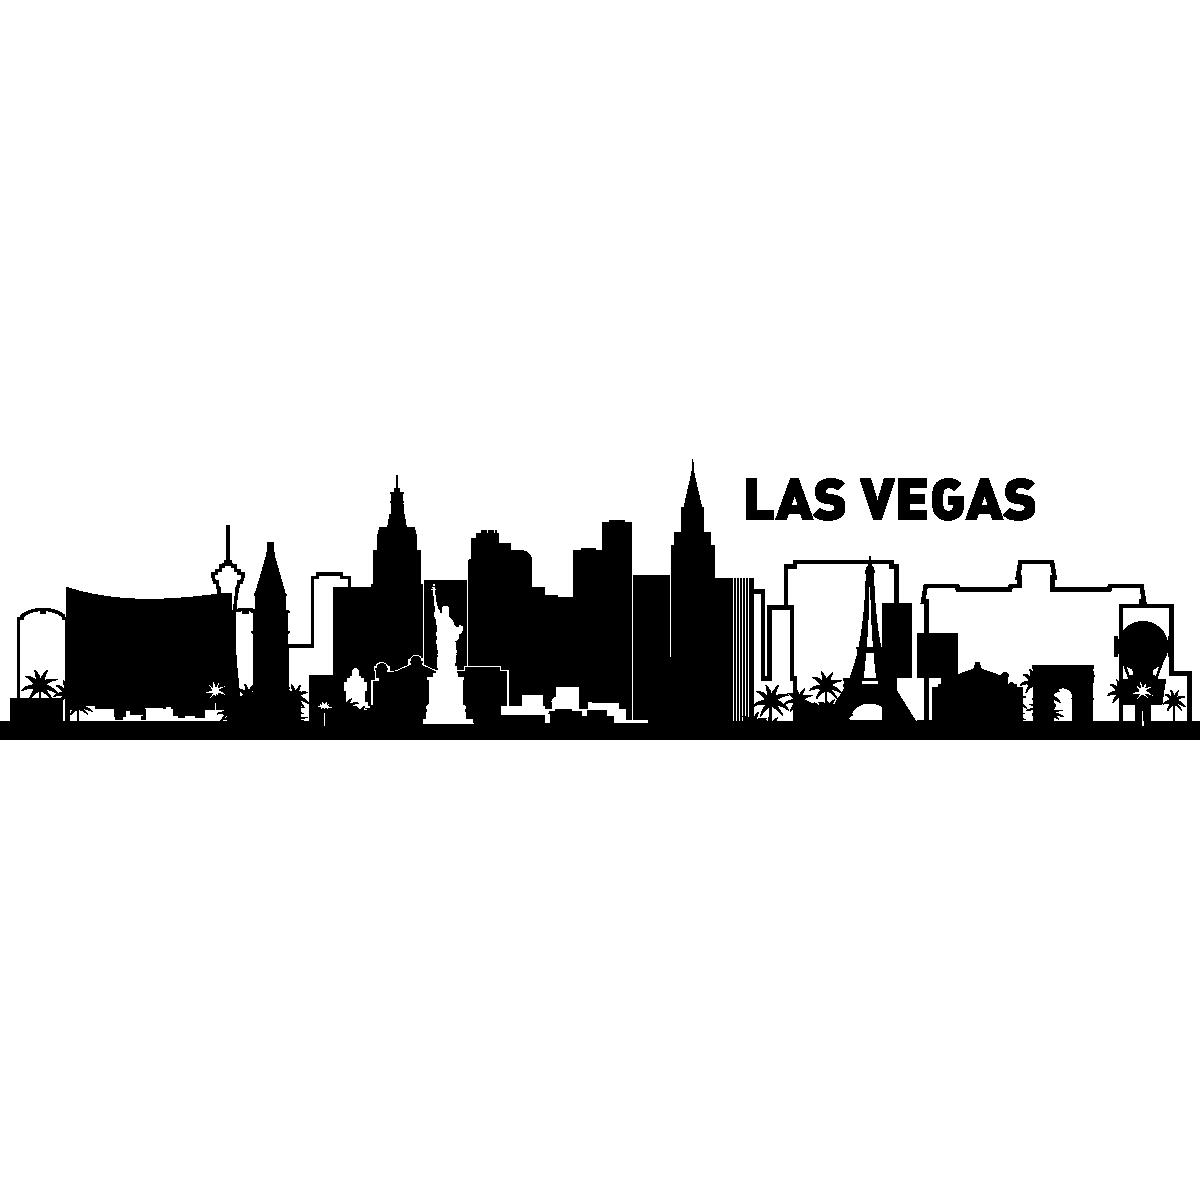  Vinyl Wall Art Decal - Welcome to Las Vegas Sign - 35